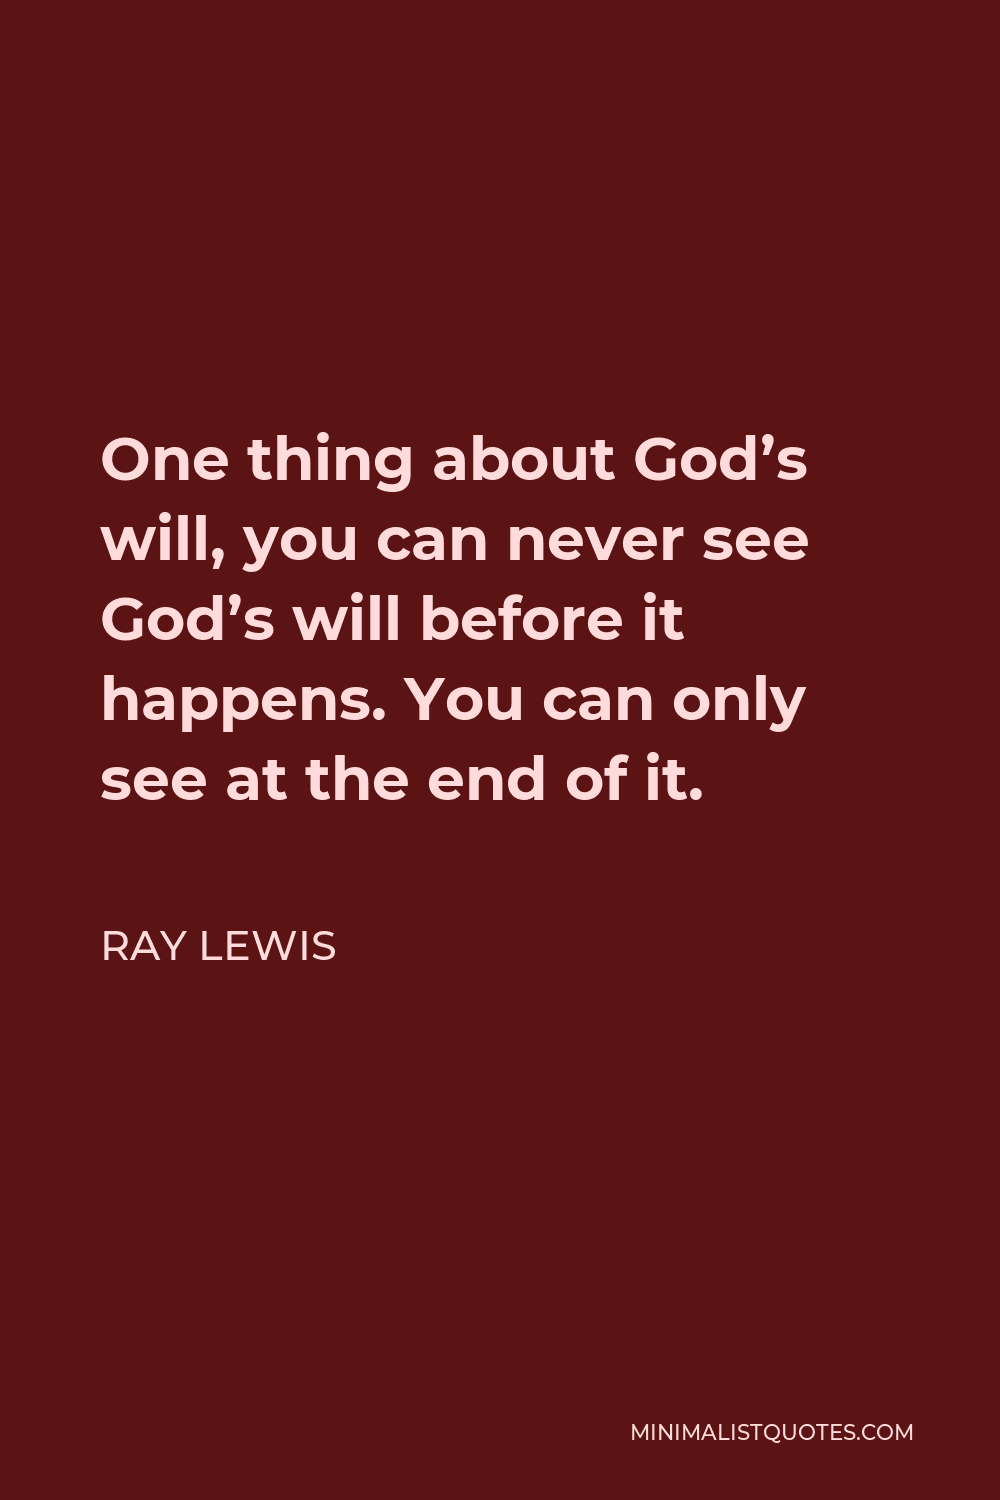 Ray Lewis Quote - One thing about God’s will, you can never see God’s will before it happens. You can only see at the end of it.